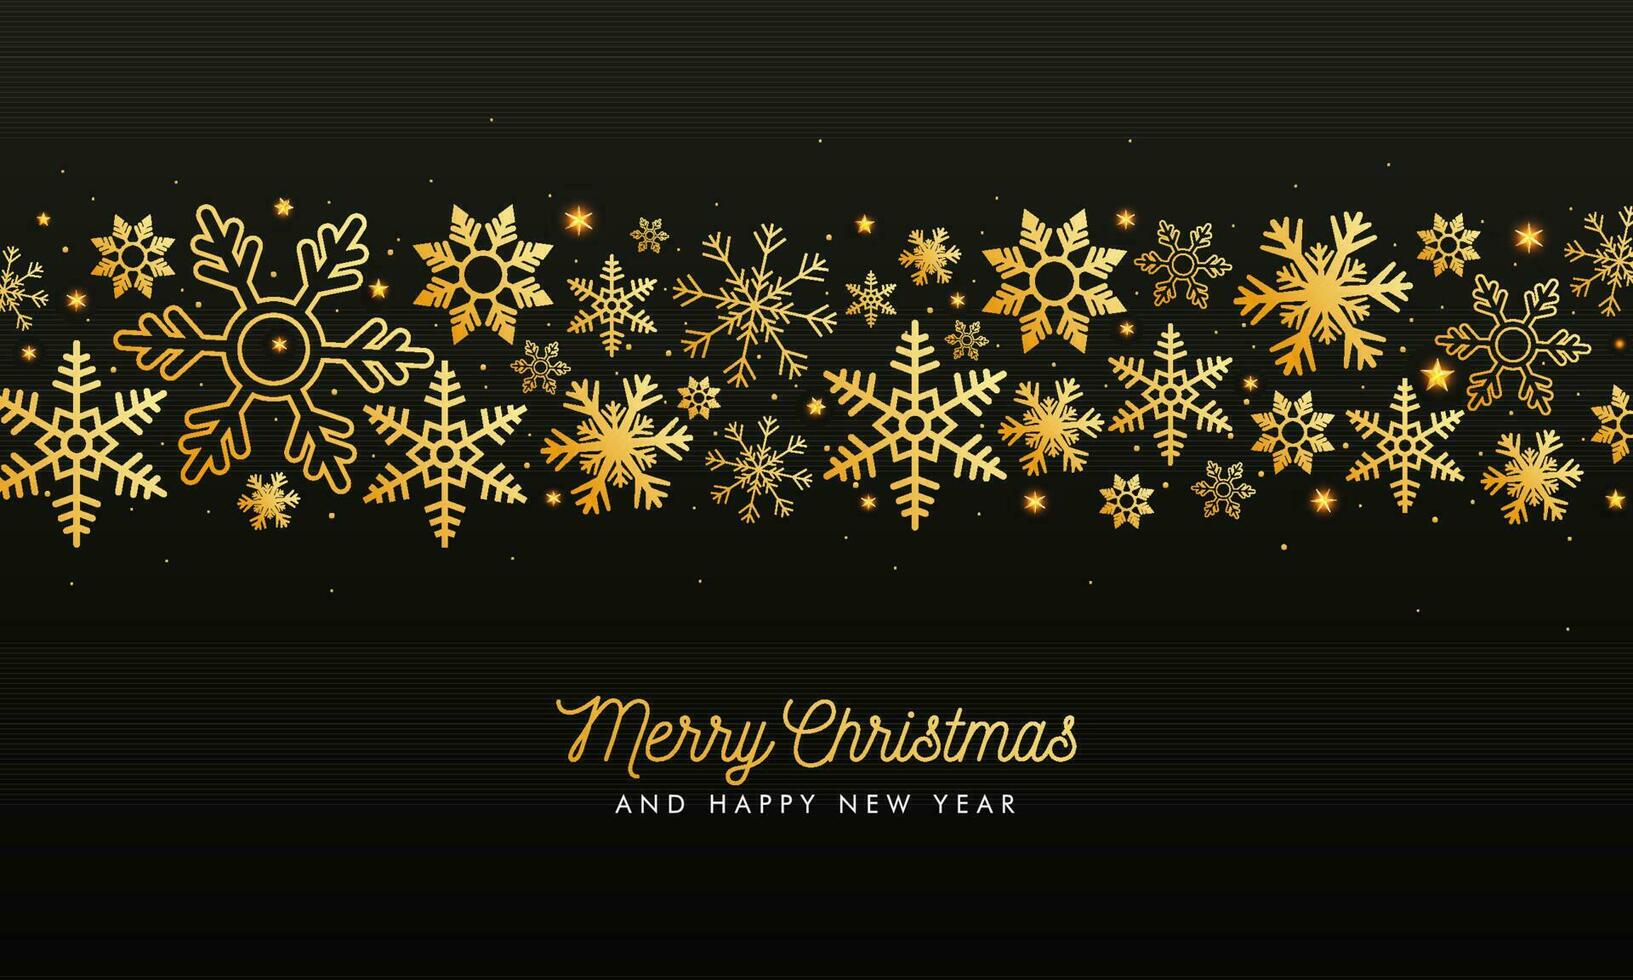 Merry Christmas and Happy New Year greeting card design with golden stars and snowflakes decorated on black background. vector